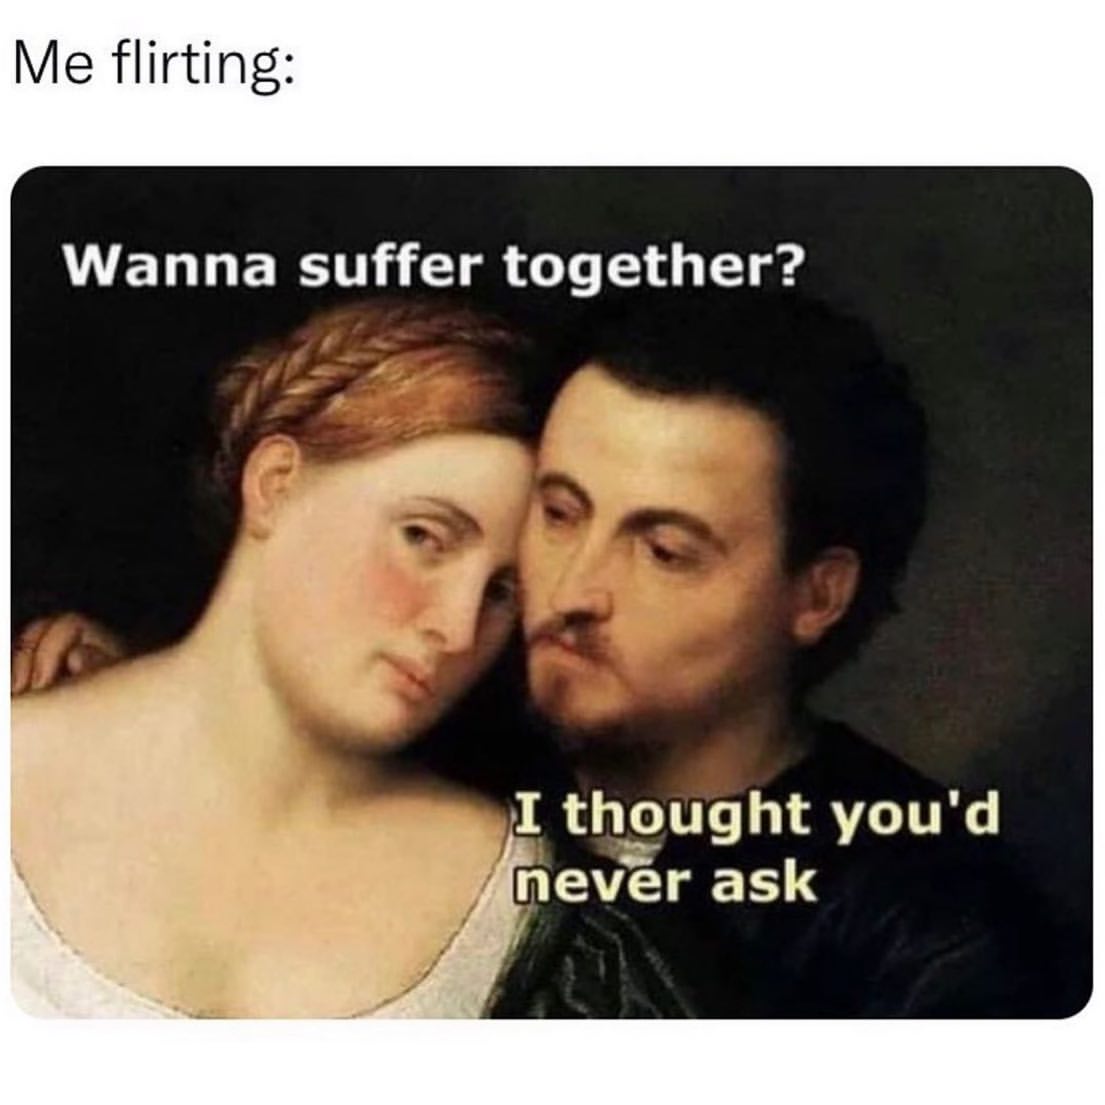 Me flirting: Wanna suffer together? I thought you'd never ask.